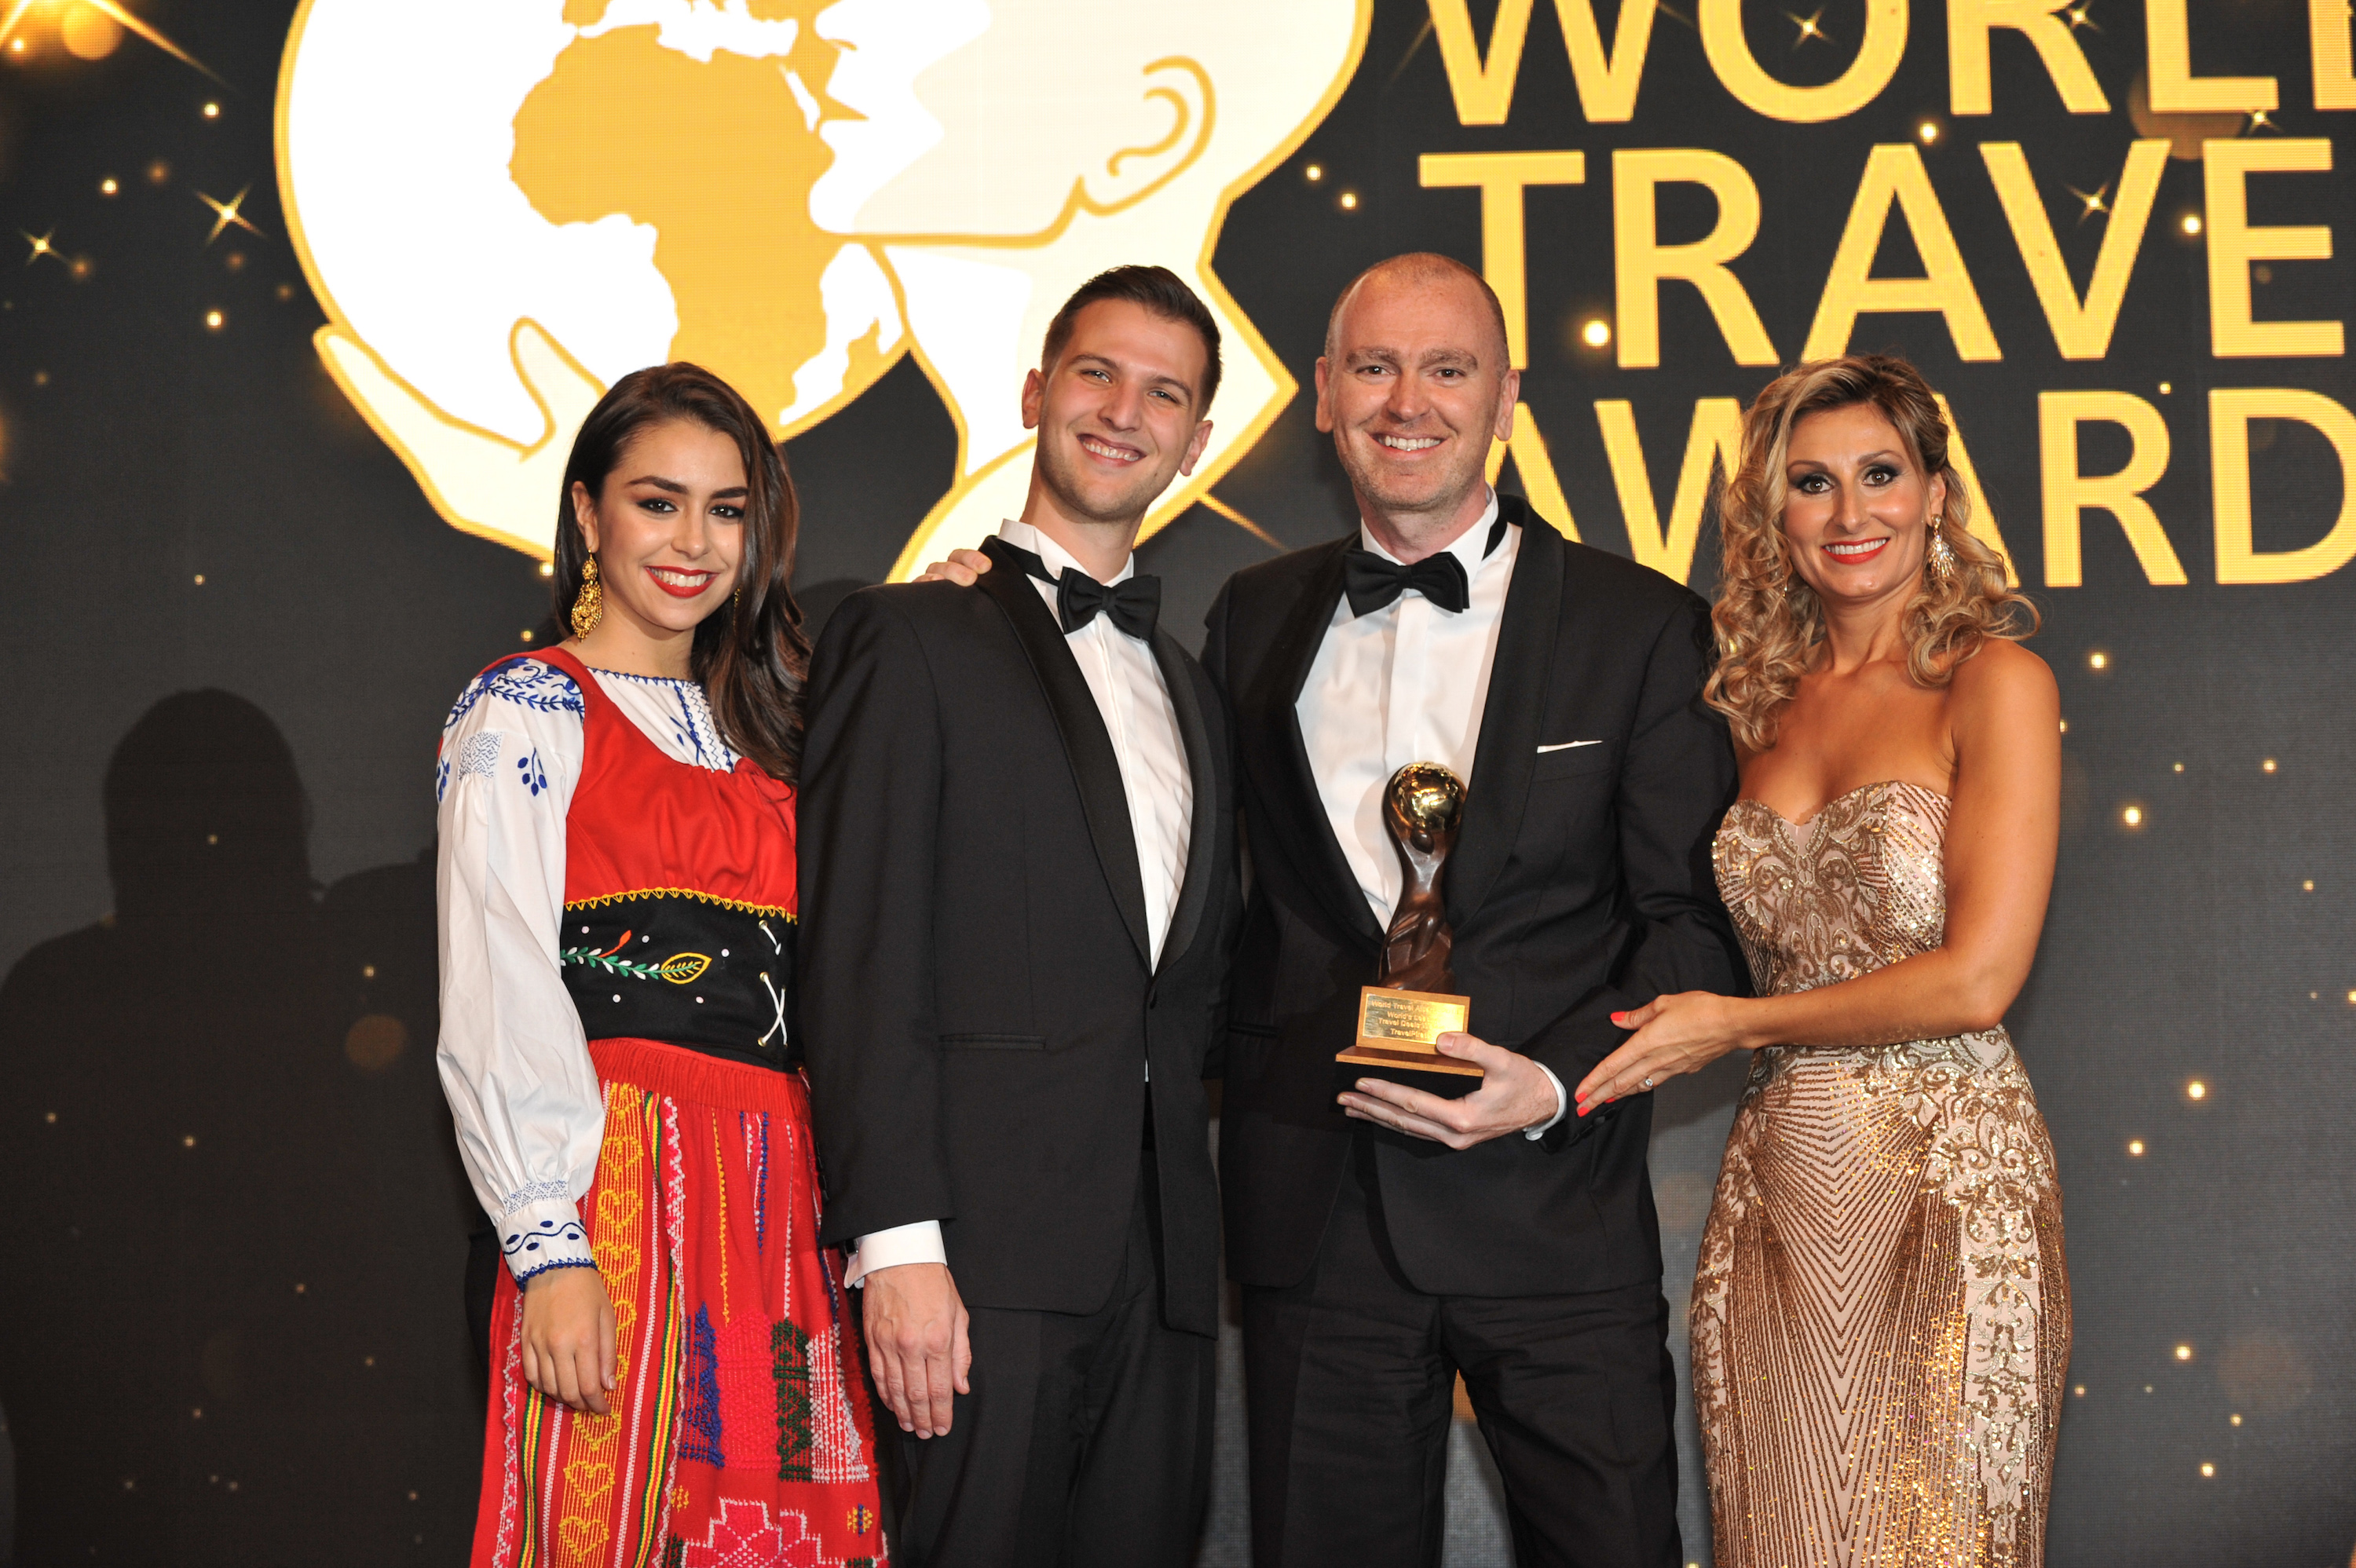 Calvin Iverson (left), Senior PR Manager, and Phil Salcedo (right), VP, North America, accept the award for World's Leading Travel Deals Website at the 2018 World Travel Awards in Lisbon on Saturday.